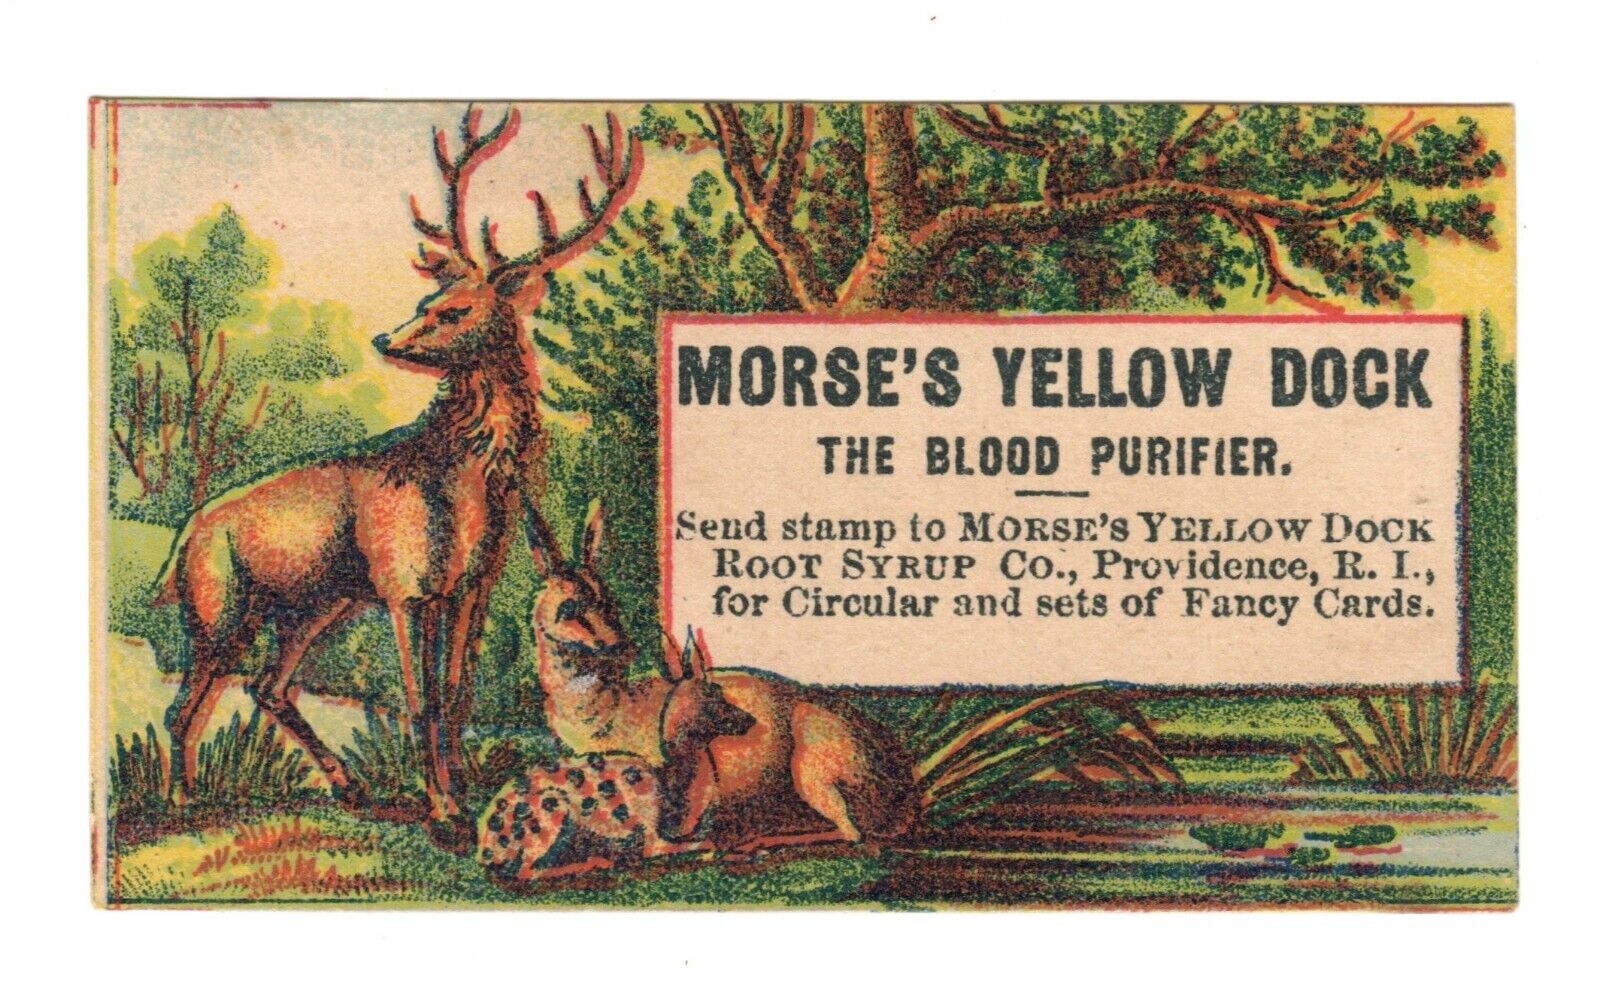 Dr Morses Yellow Dock Root Syrup Co The Blood Purifier Victorian Trade Card Deer